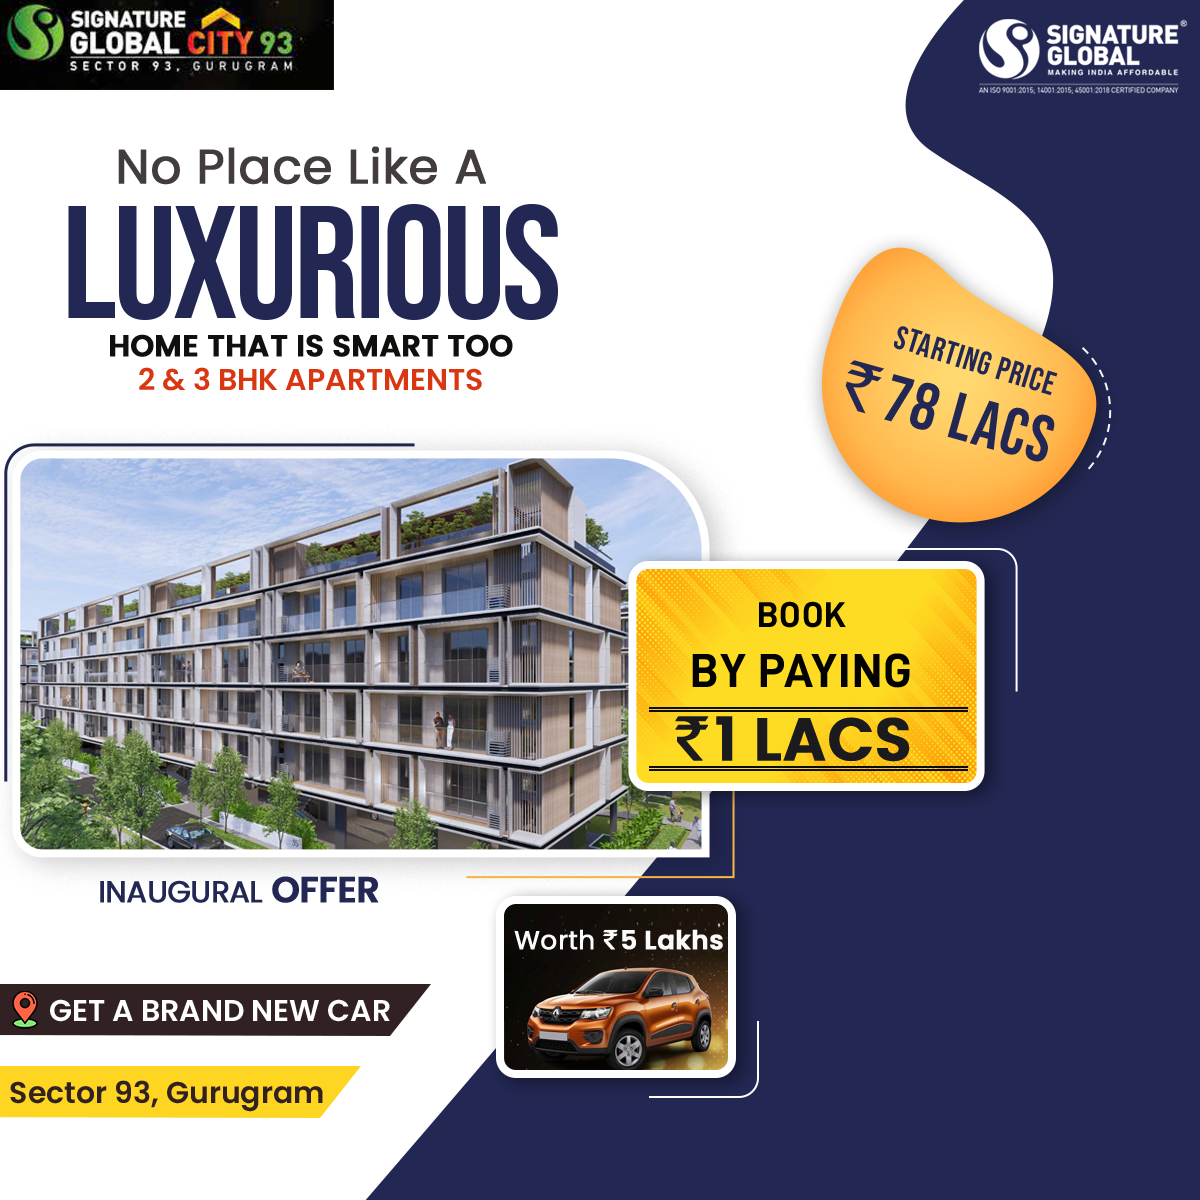 Book by paying Rs 1 Lac at Signature Global City 93, Gurgaon